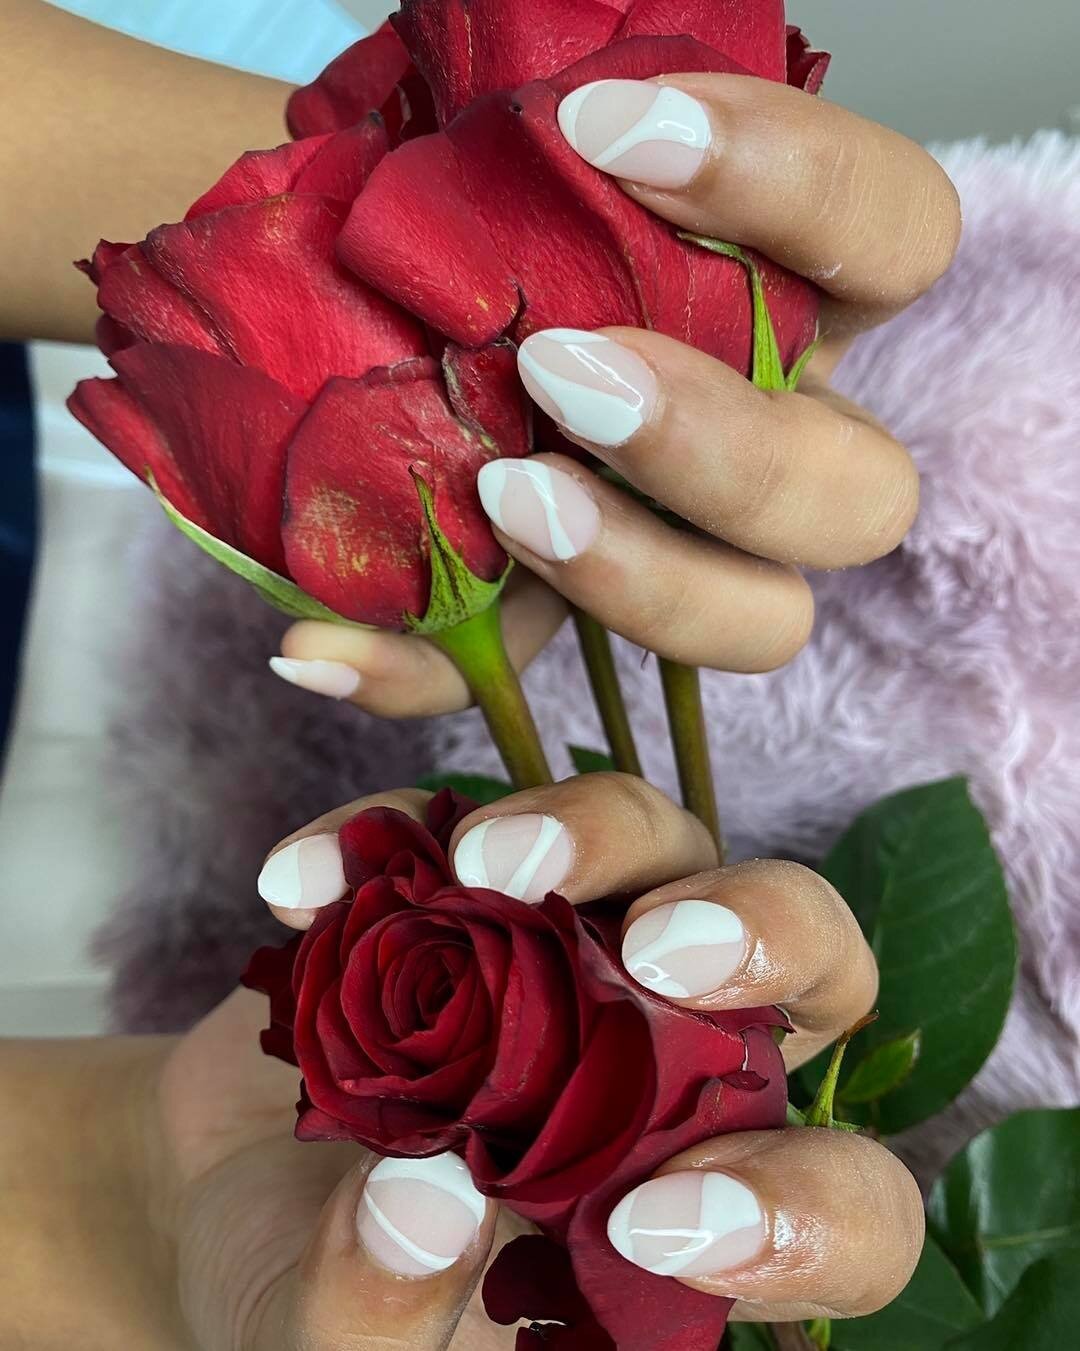 Beeq Nails Spa seeking FT nail tech for Ann Arbor, MI salon. Duties: clean, shape, polish, and decorate nails. Must have completed cosmetology course or nail technology course. Must apply for state license upon staring position. Email resume to Son C